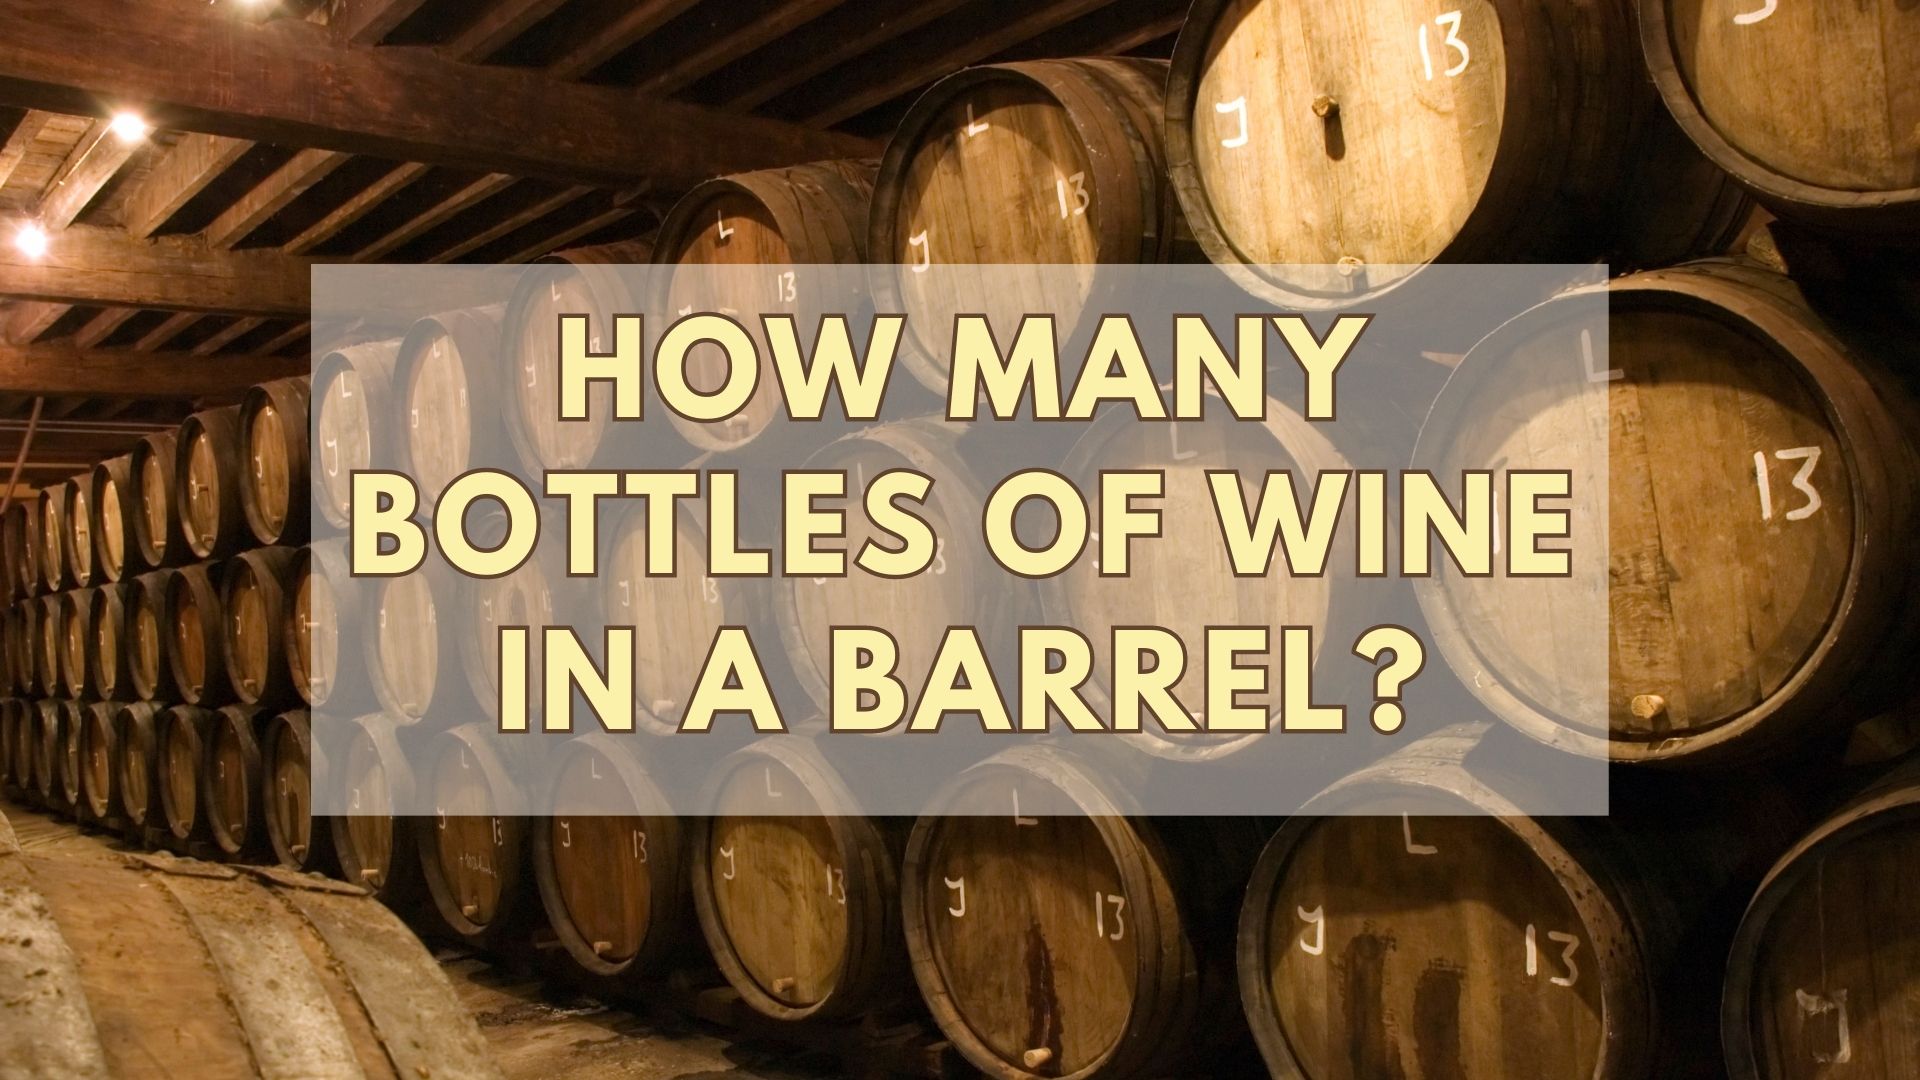 How Many Bottles Of Wine In A Barrel